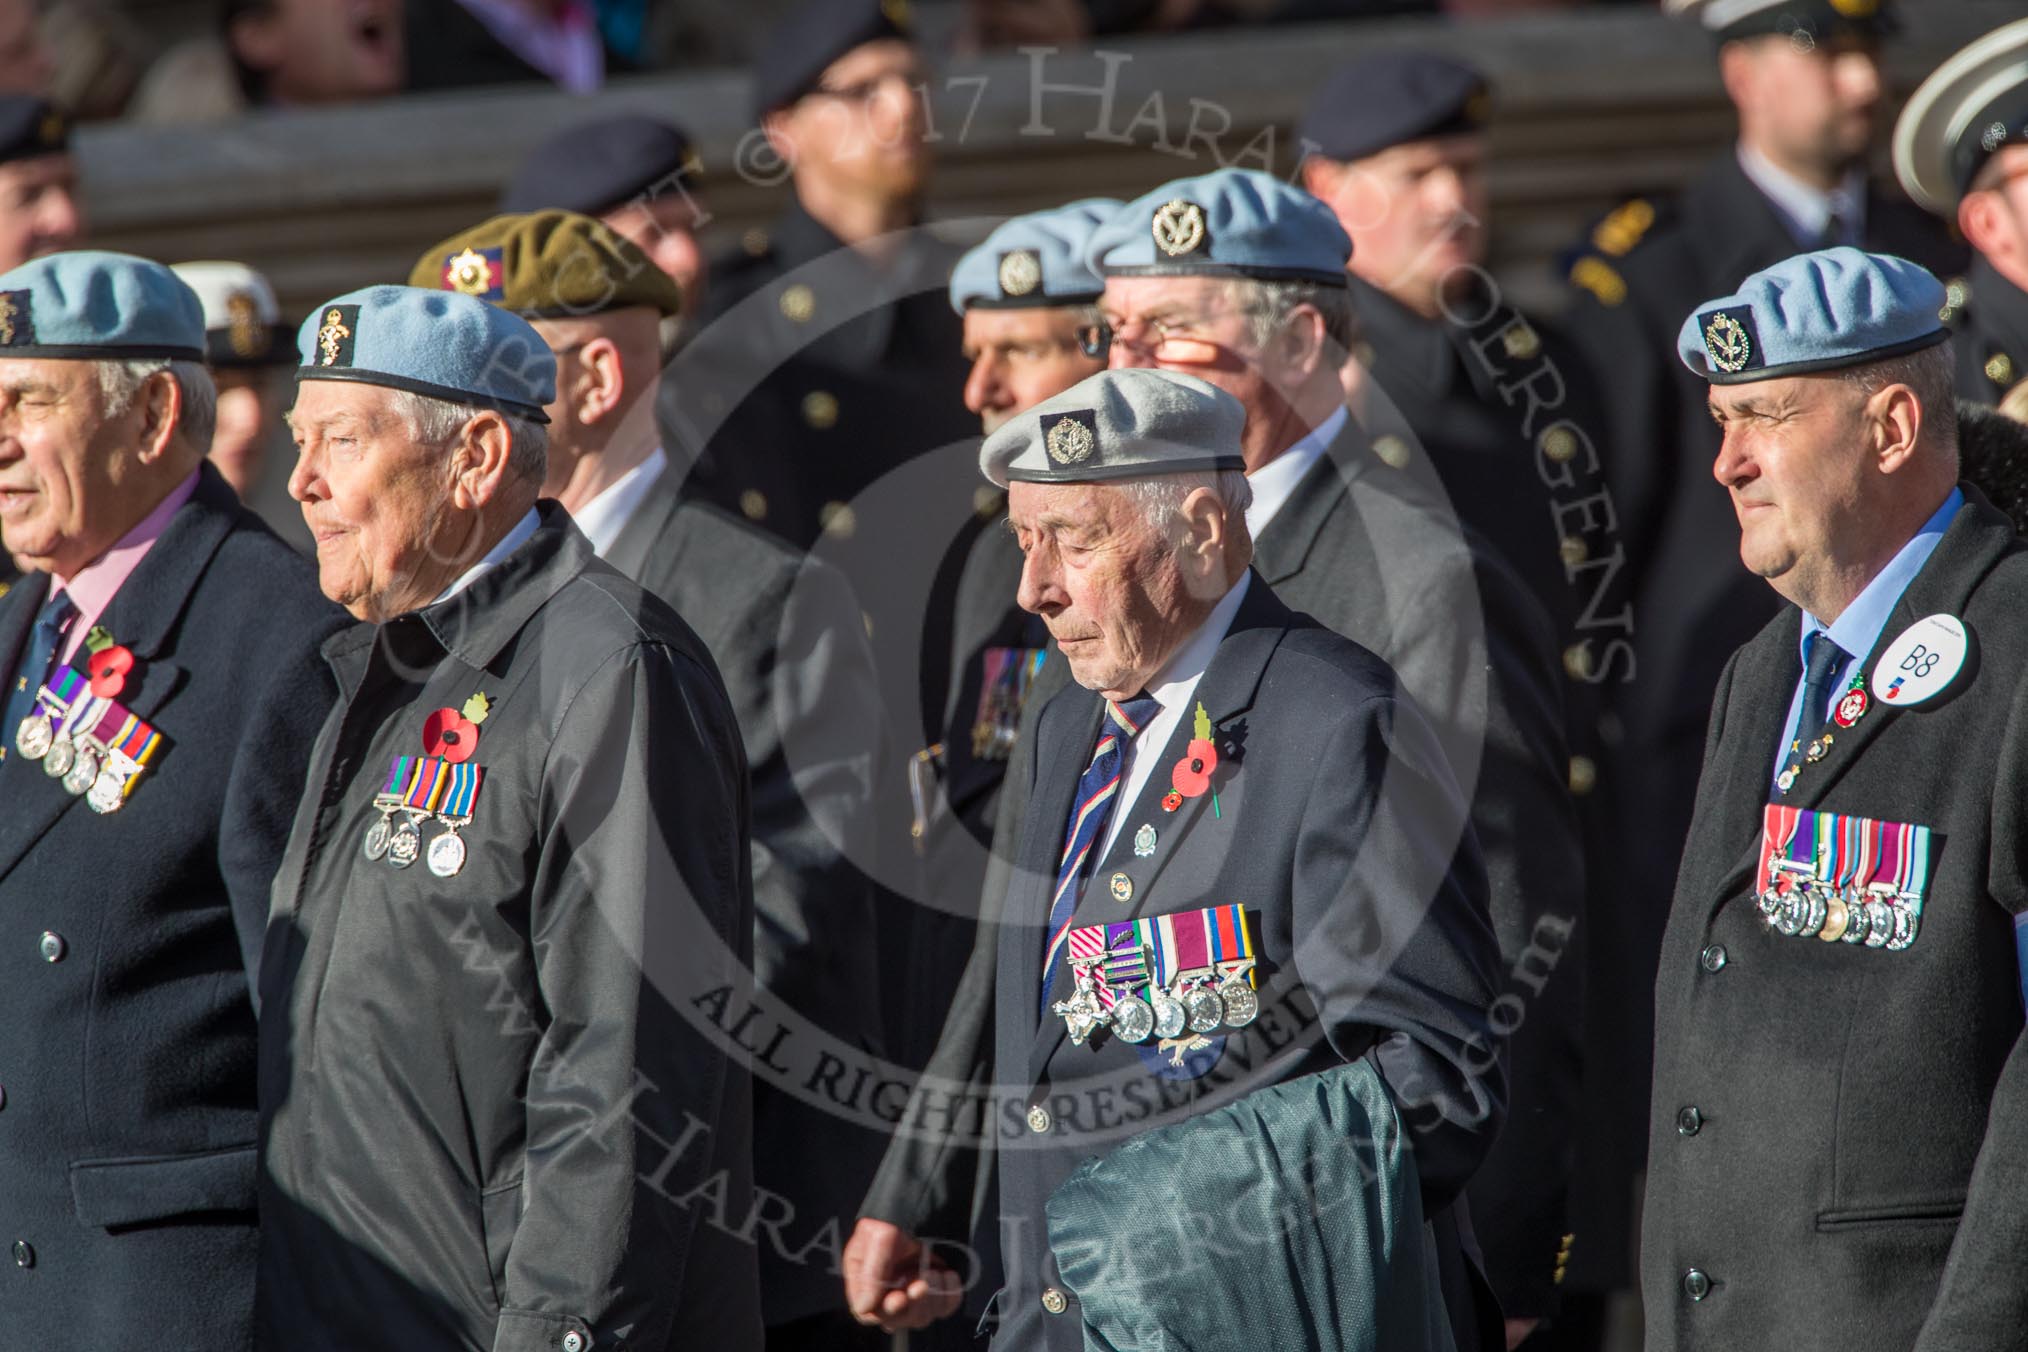 656 Squadron Association (Group B8, 24 members) during the Royal British Legion March Past on Remembrance Sunday at the Cenotaph, Whitehall, Westminster, London, 11 November 2018, 12:07.